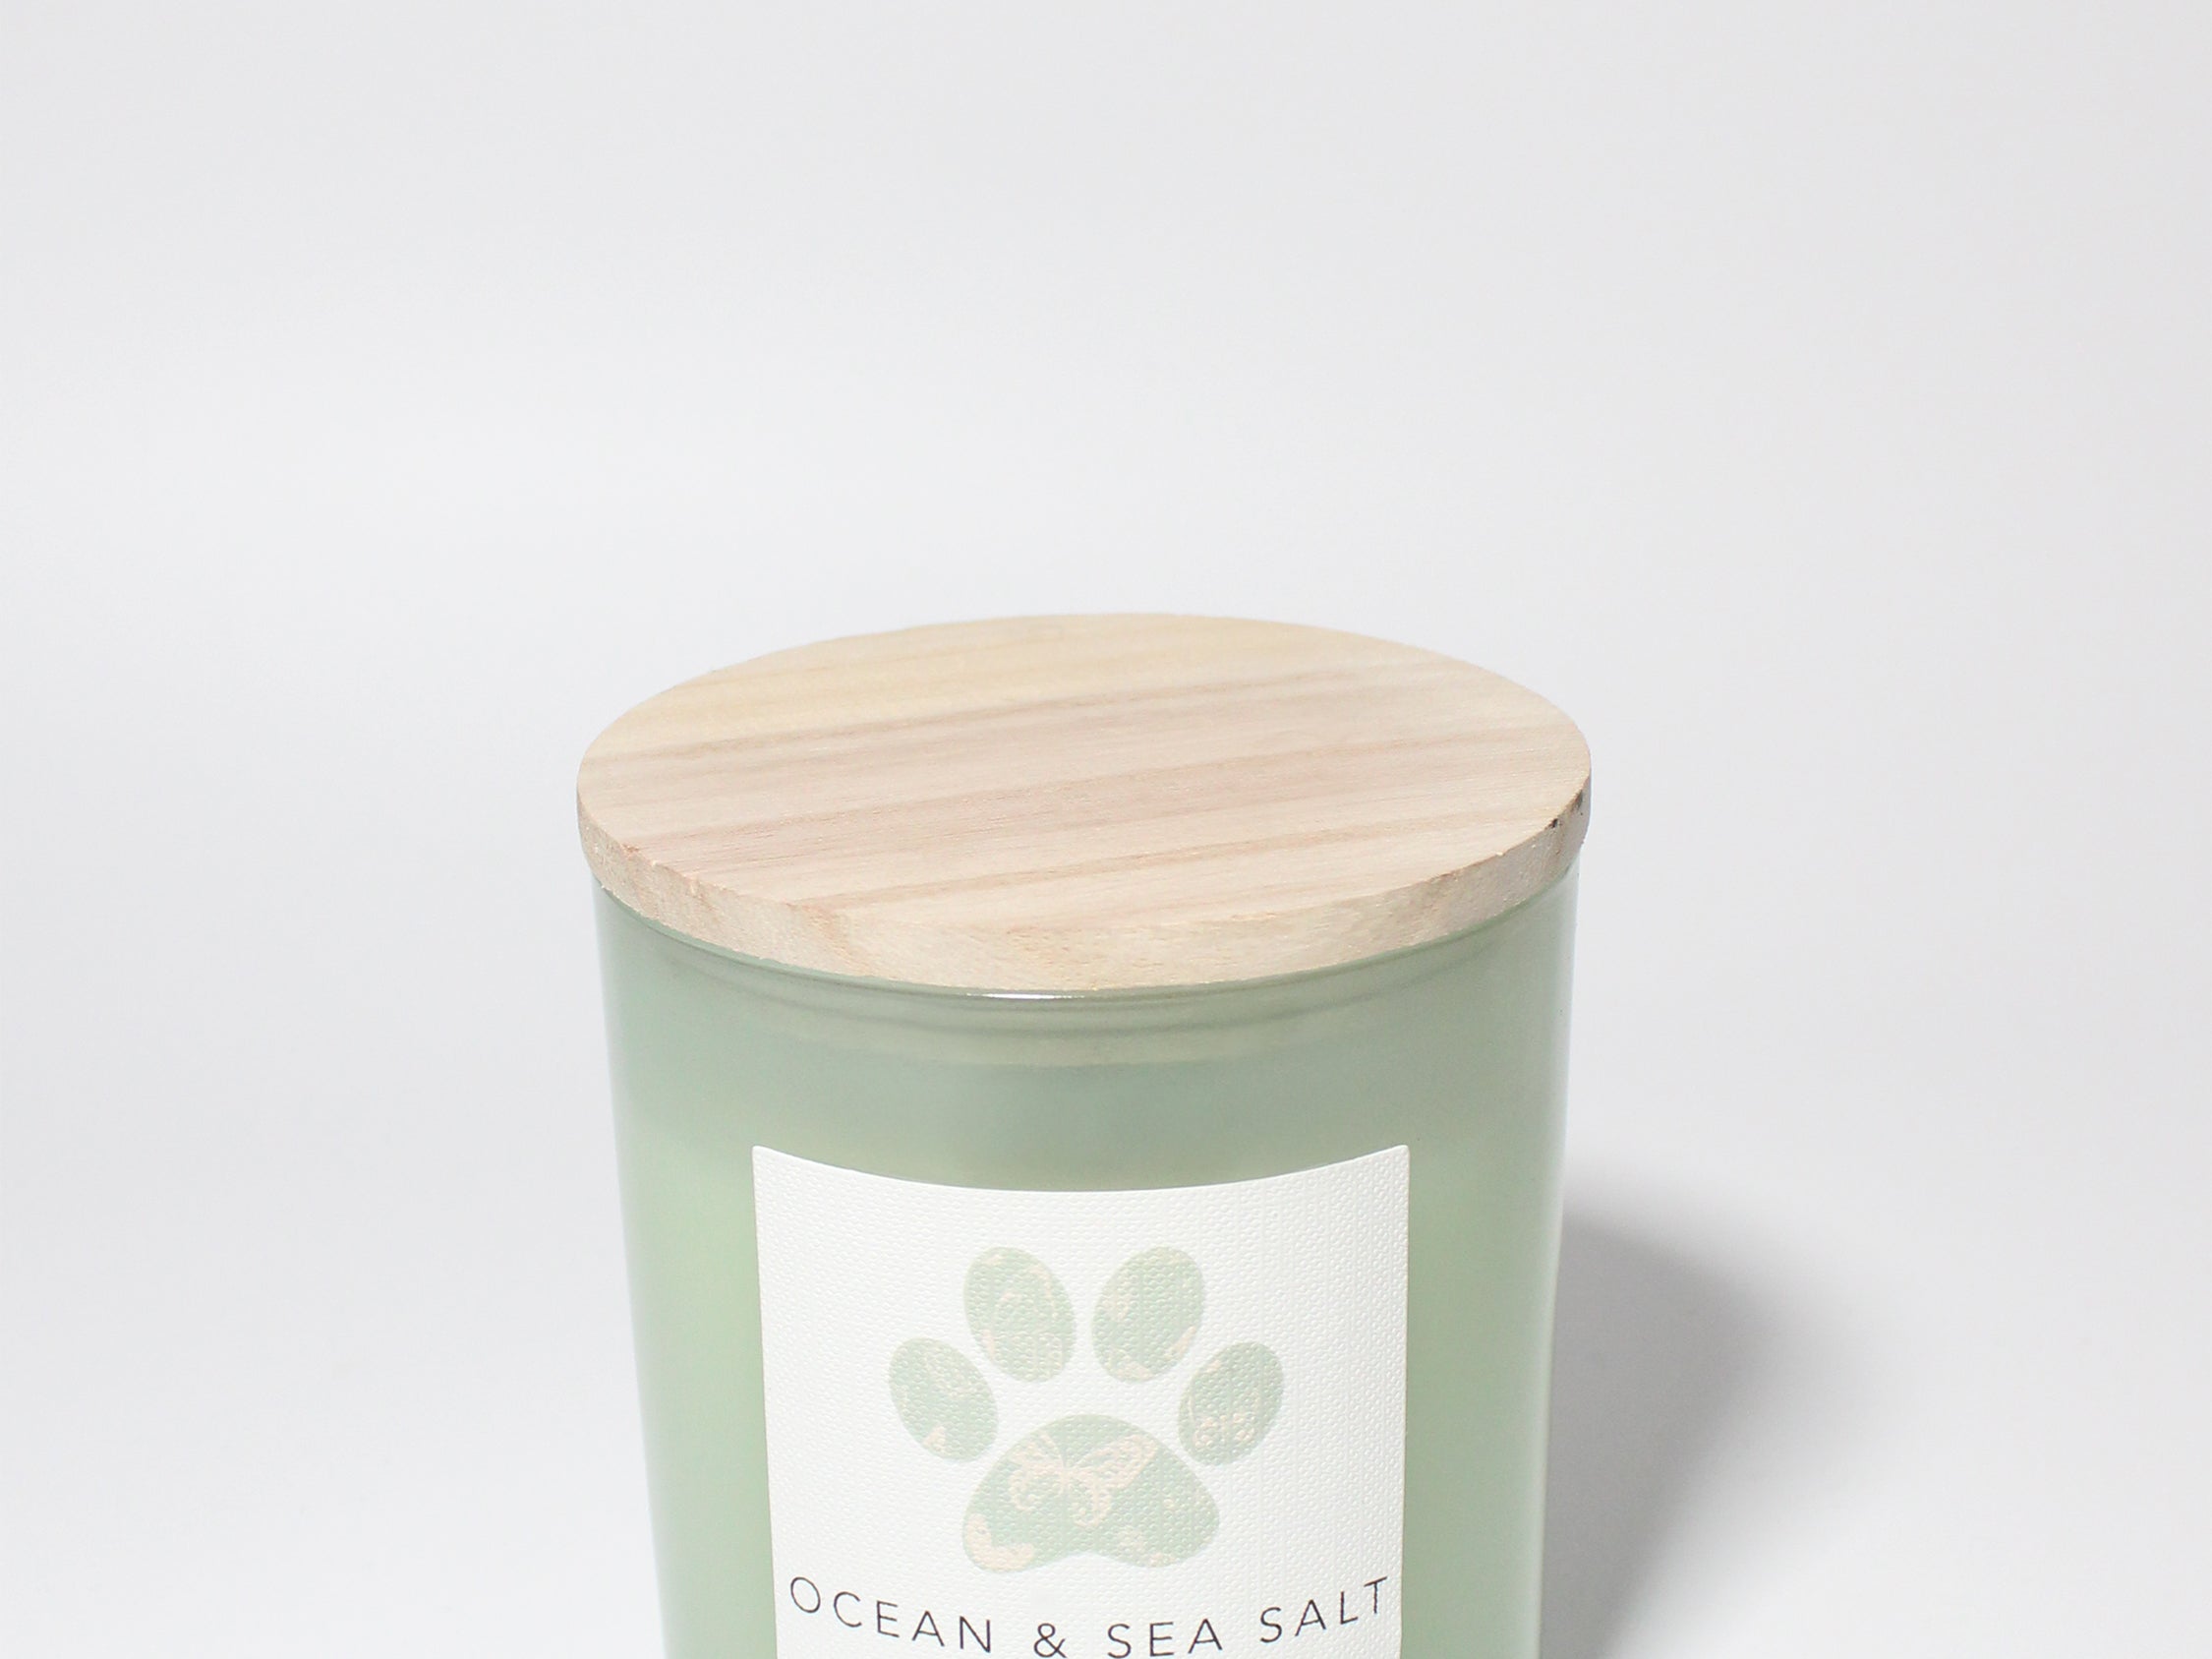 Sand + Paws Ocean & Sea Salt 12 oz scented candle Sage vessel with wood lid and One Wick